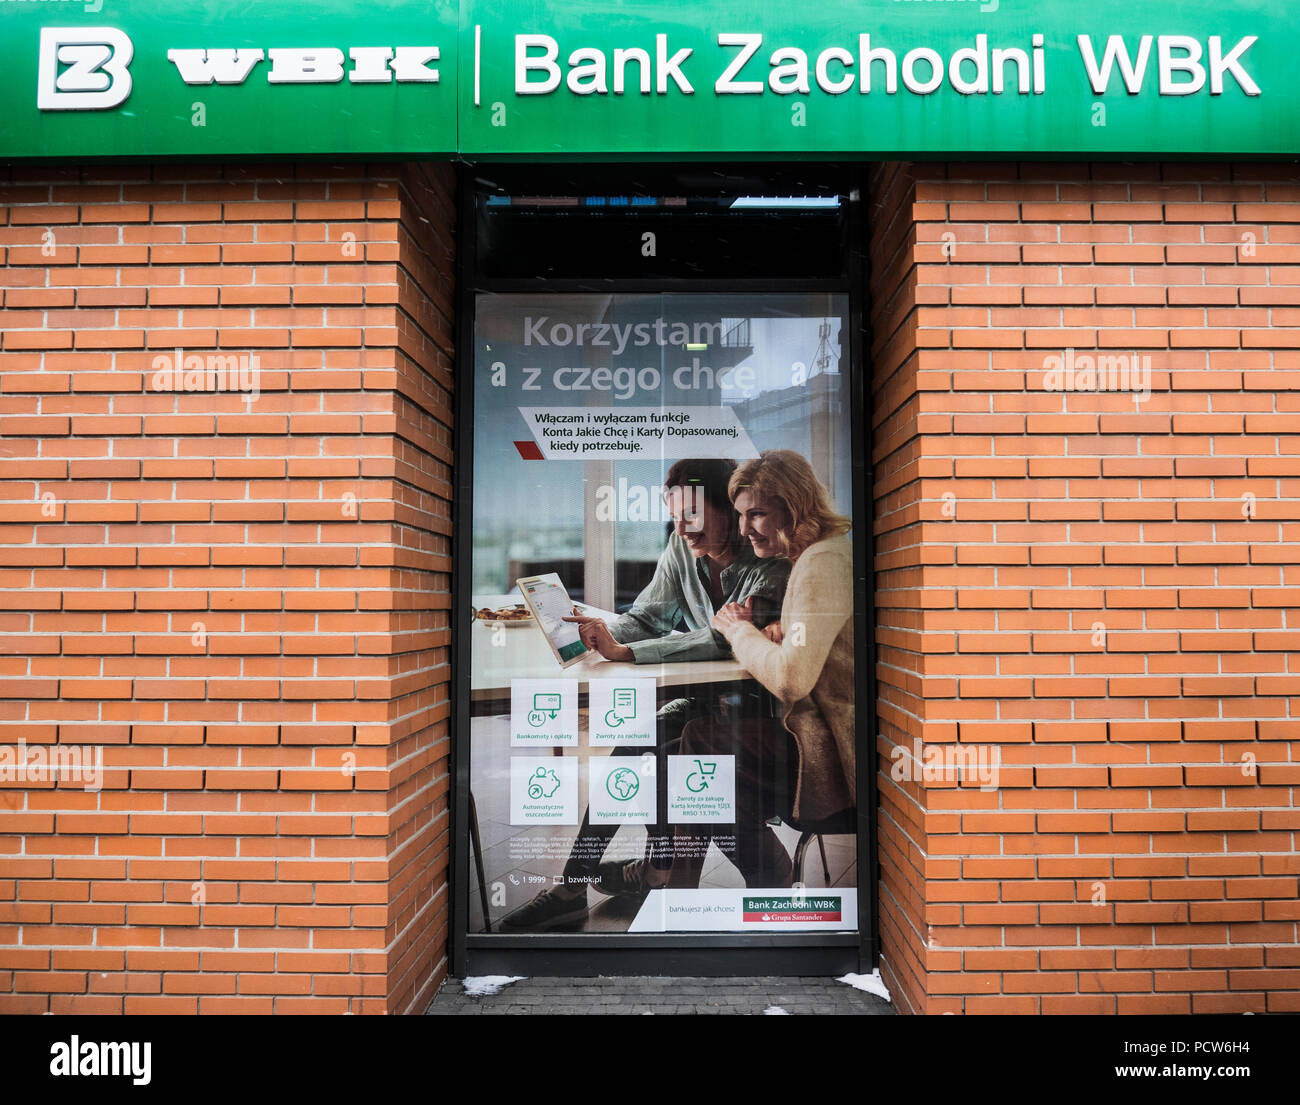 Bank Zachodni WBK in Krakow. Bank Zachodni WBK (BZ WBK) is a Polish  universal bank. It is the third largest bank in Poland in terms of assets  value and the number of